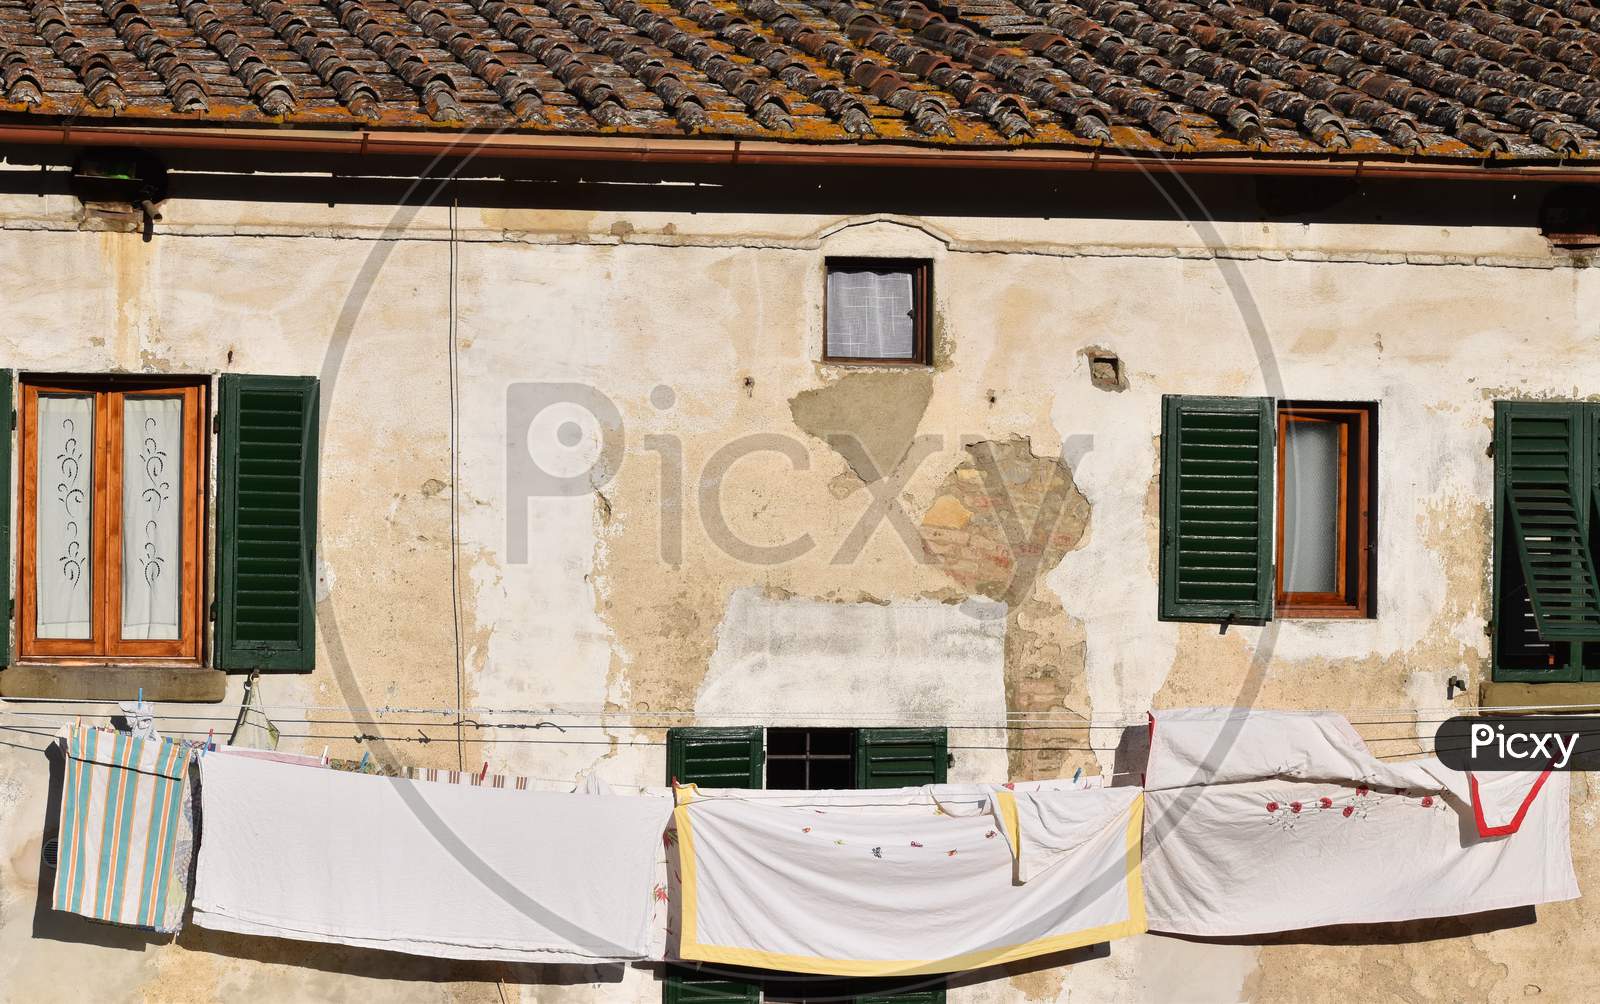 The daily washing cloth displays in Tuscany